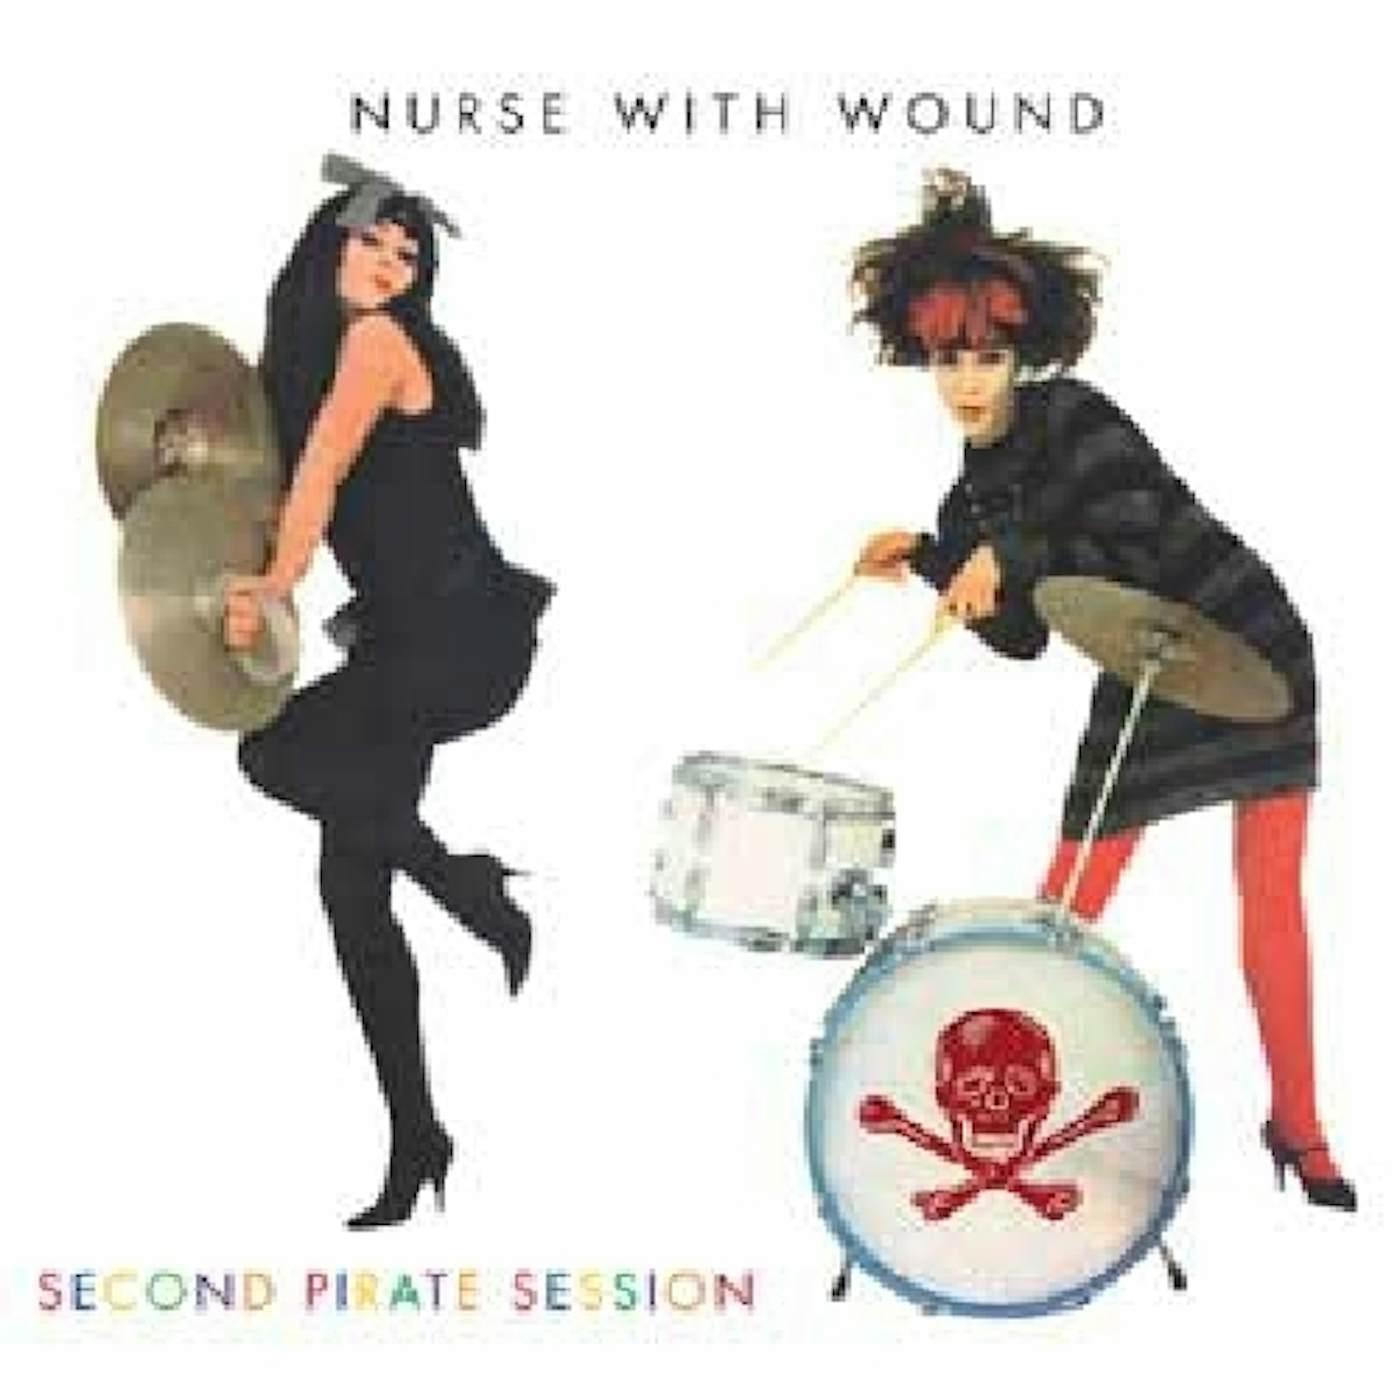 Nurse With Wound SECOND PIRATE SESSION CD